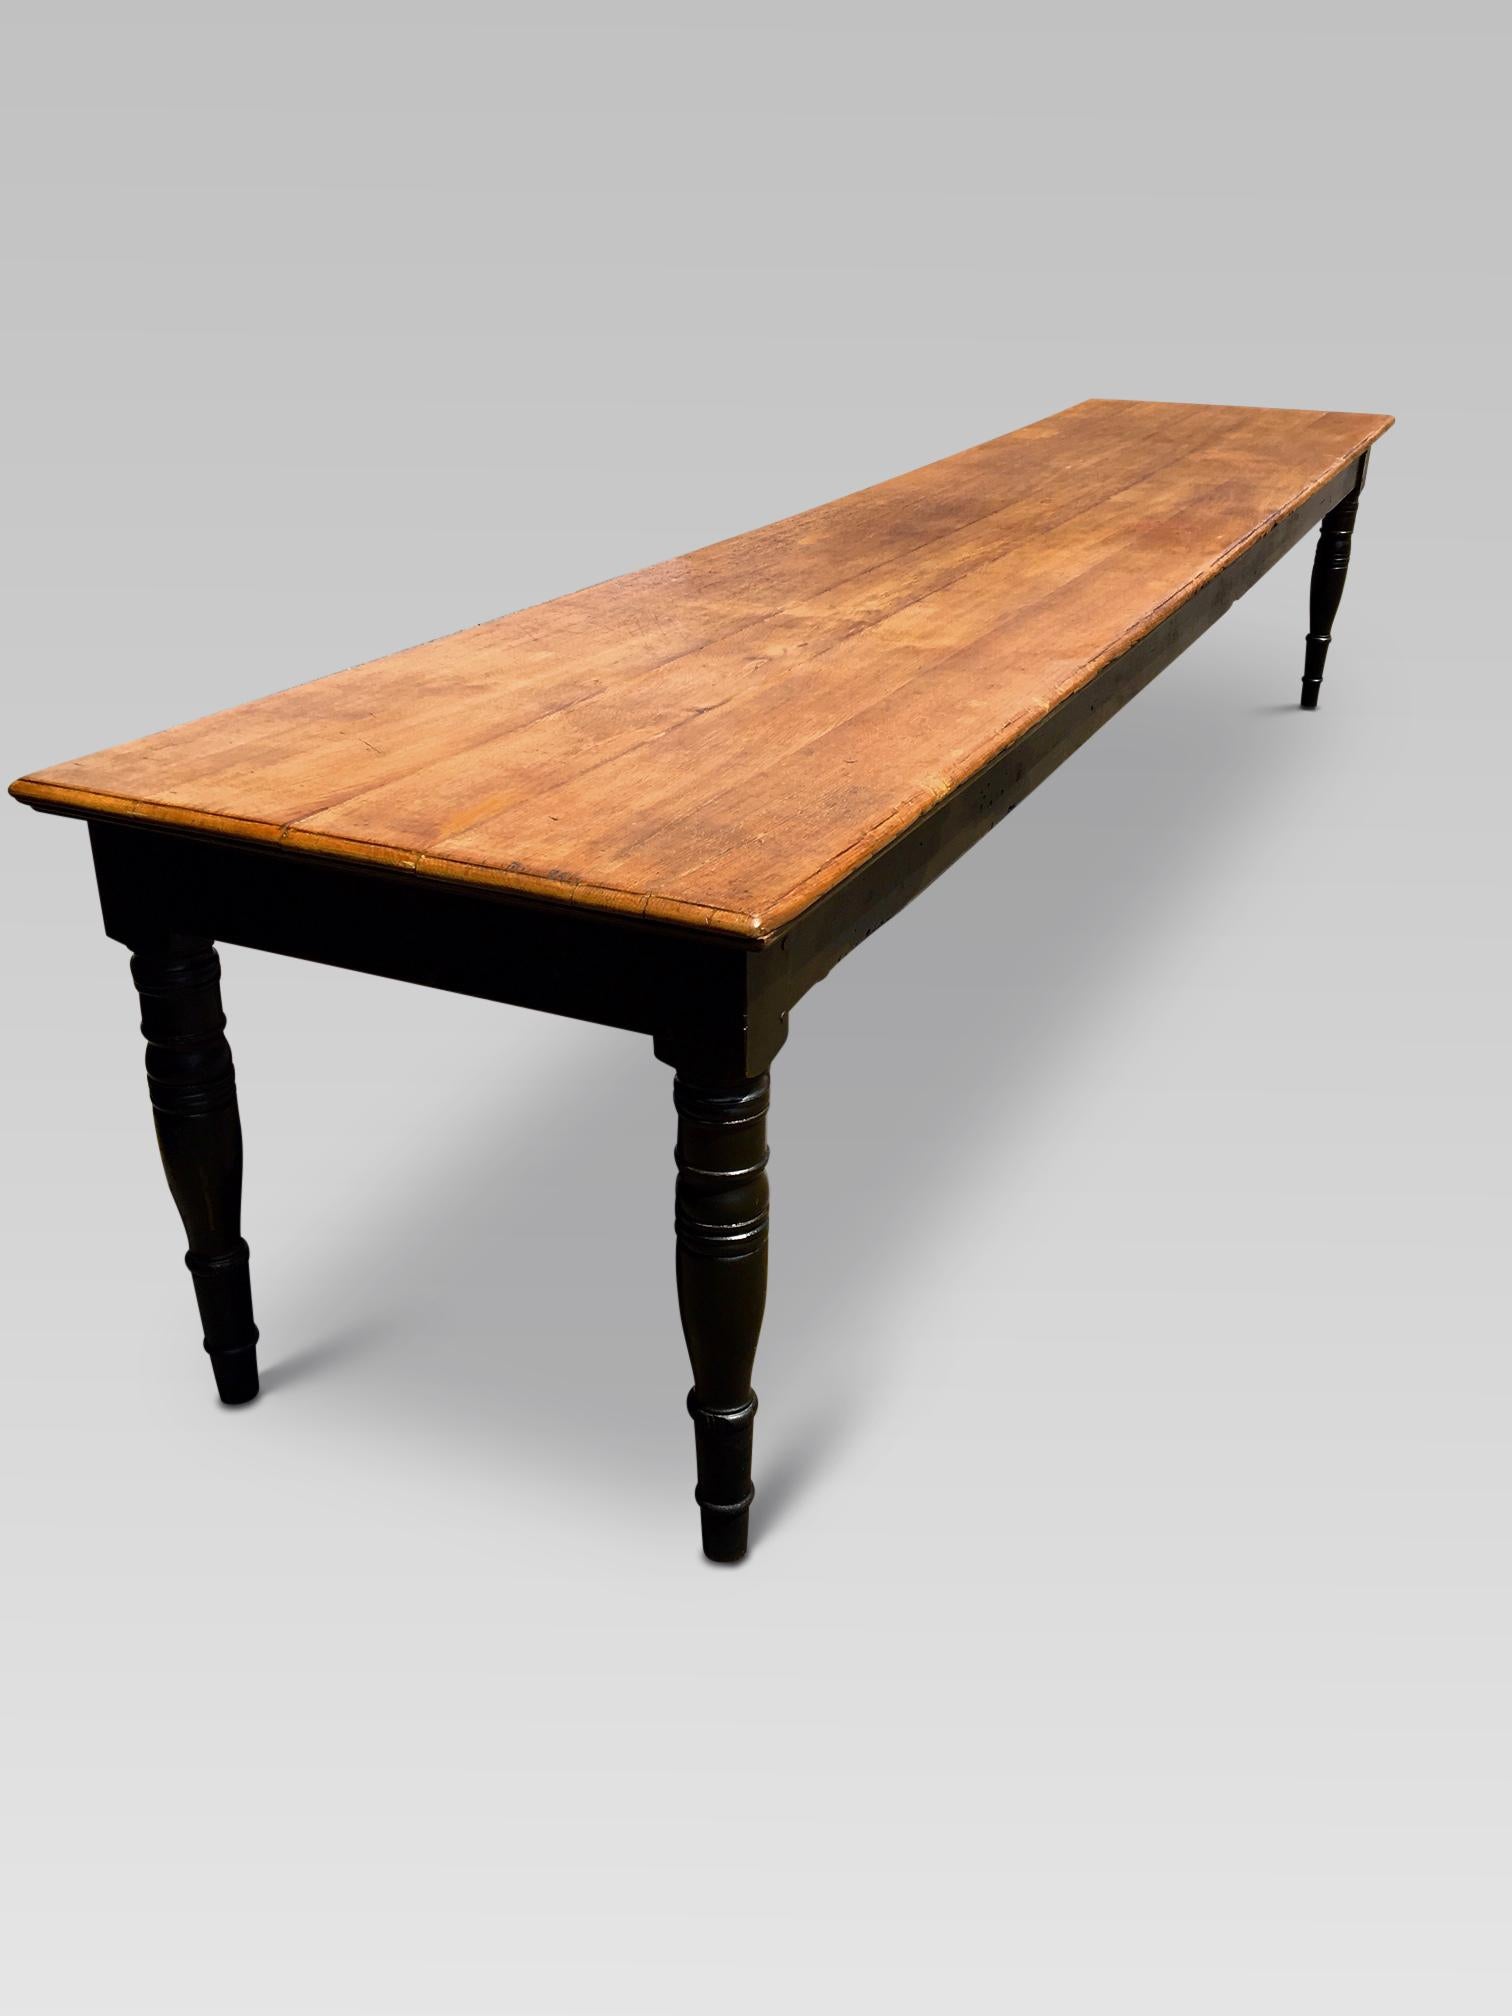 Hand-Crafted Farmhouse Table in Oak, English, circa 1860.  13 feet long For Sale